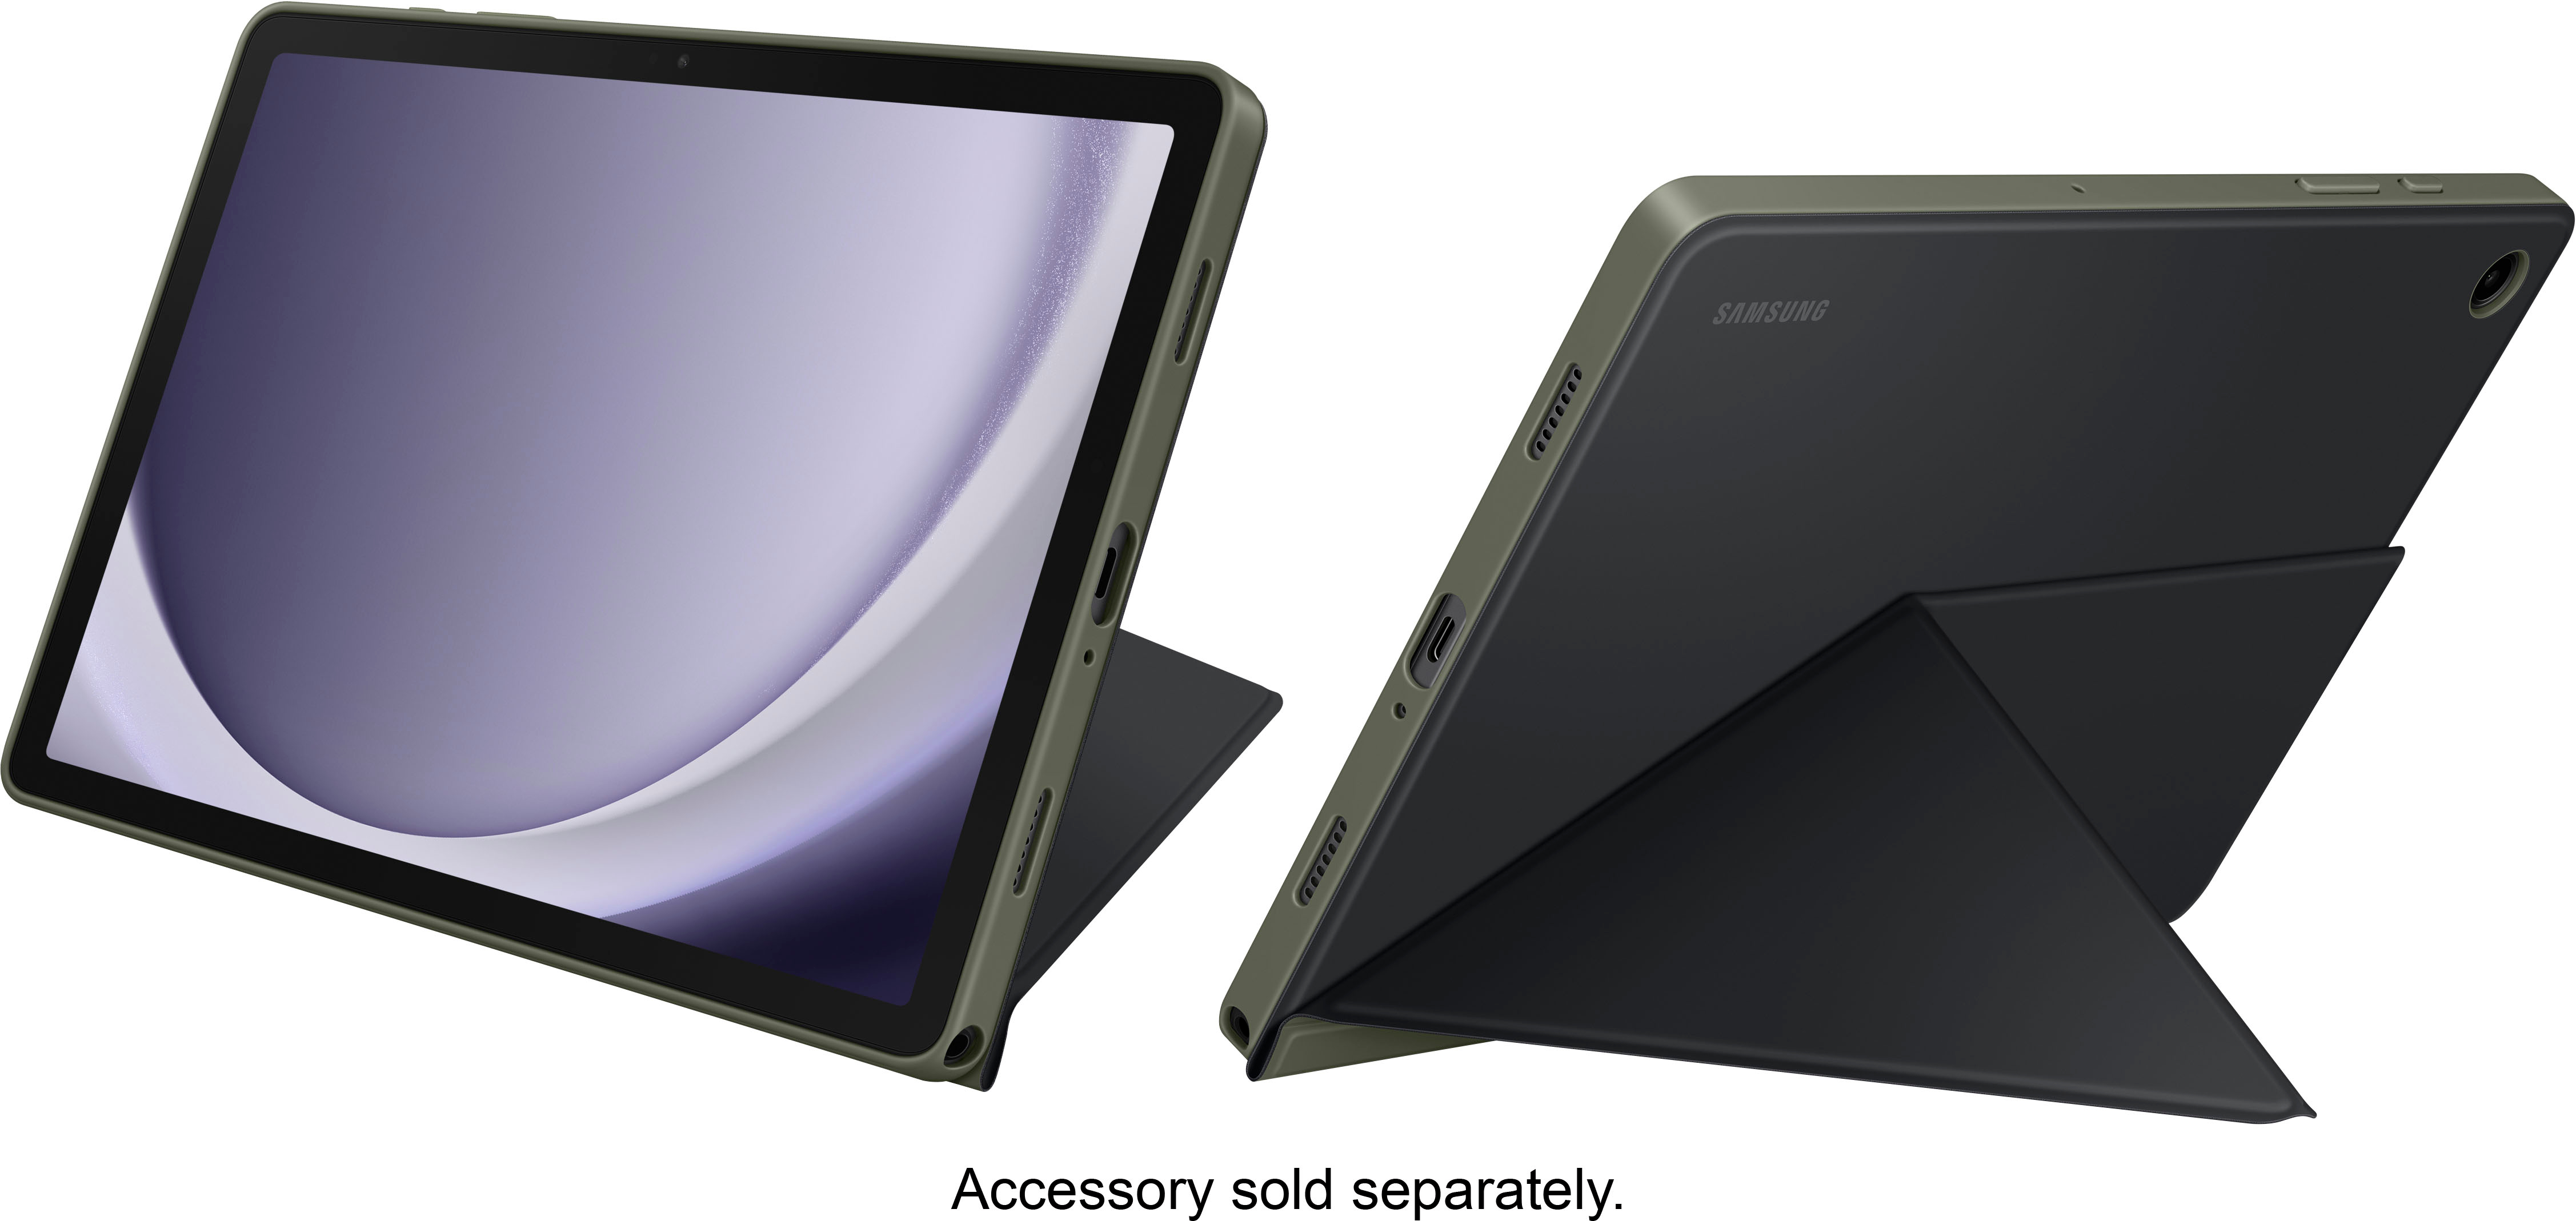 SAMSUNG Galaxy Tab A9 64 Go Wifi Graphite - Tablette tactile Pas Cher